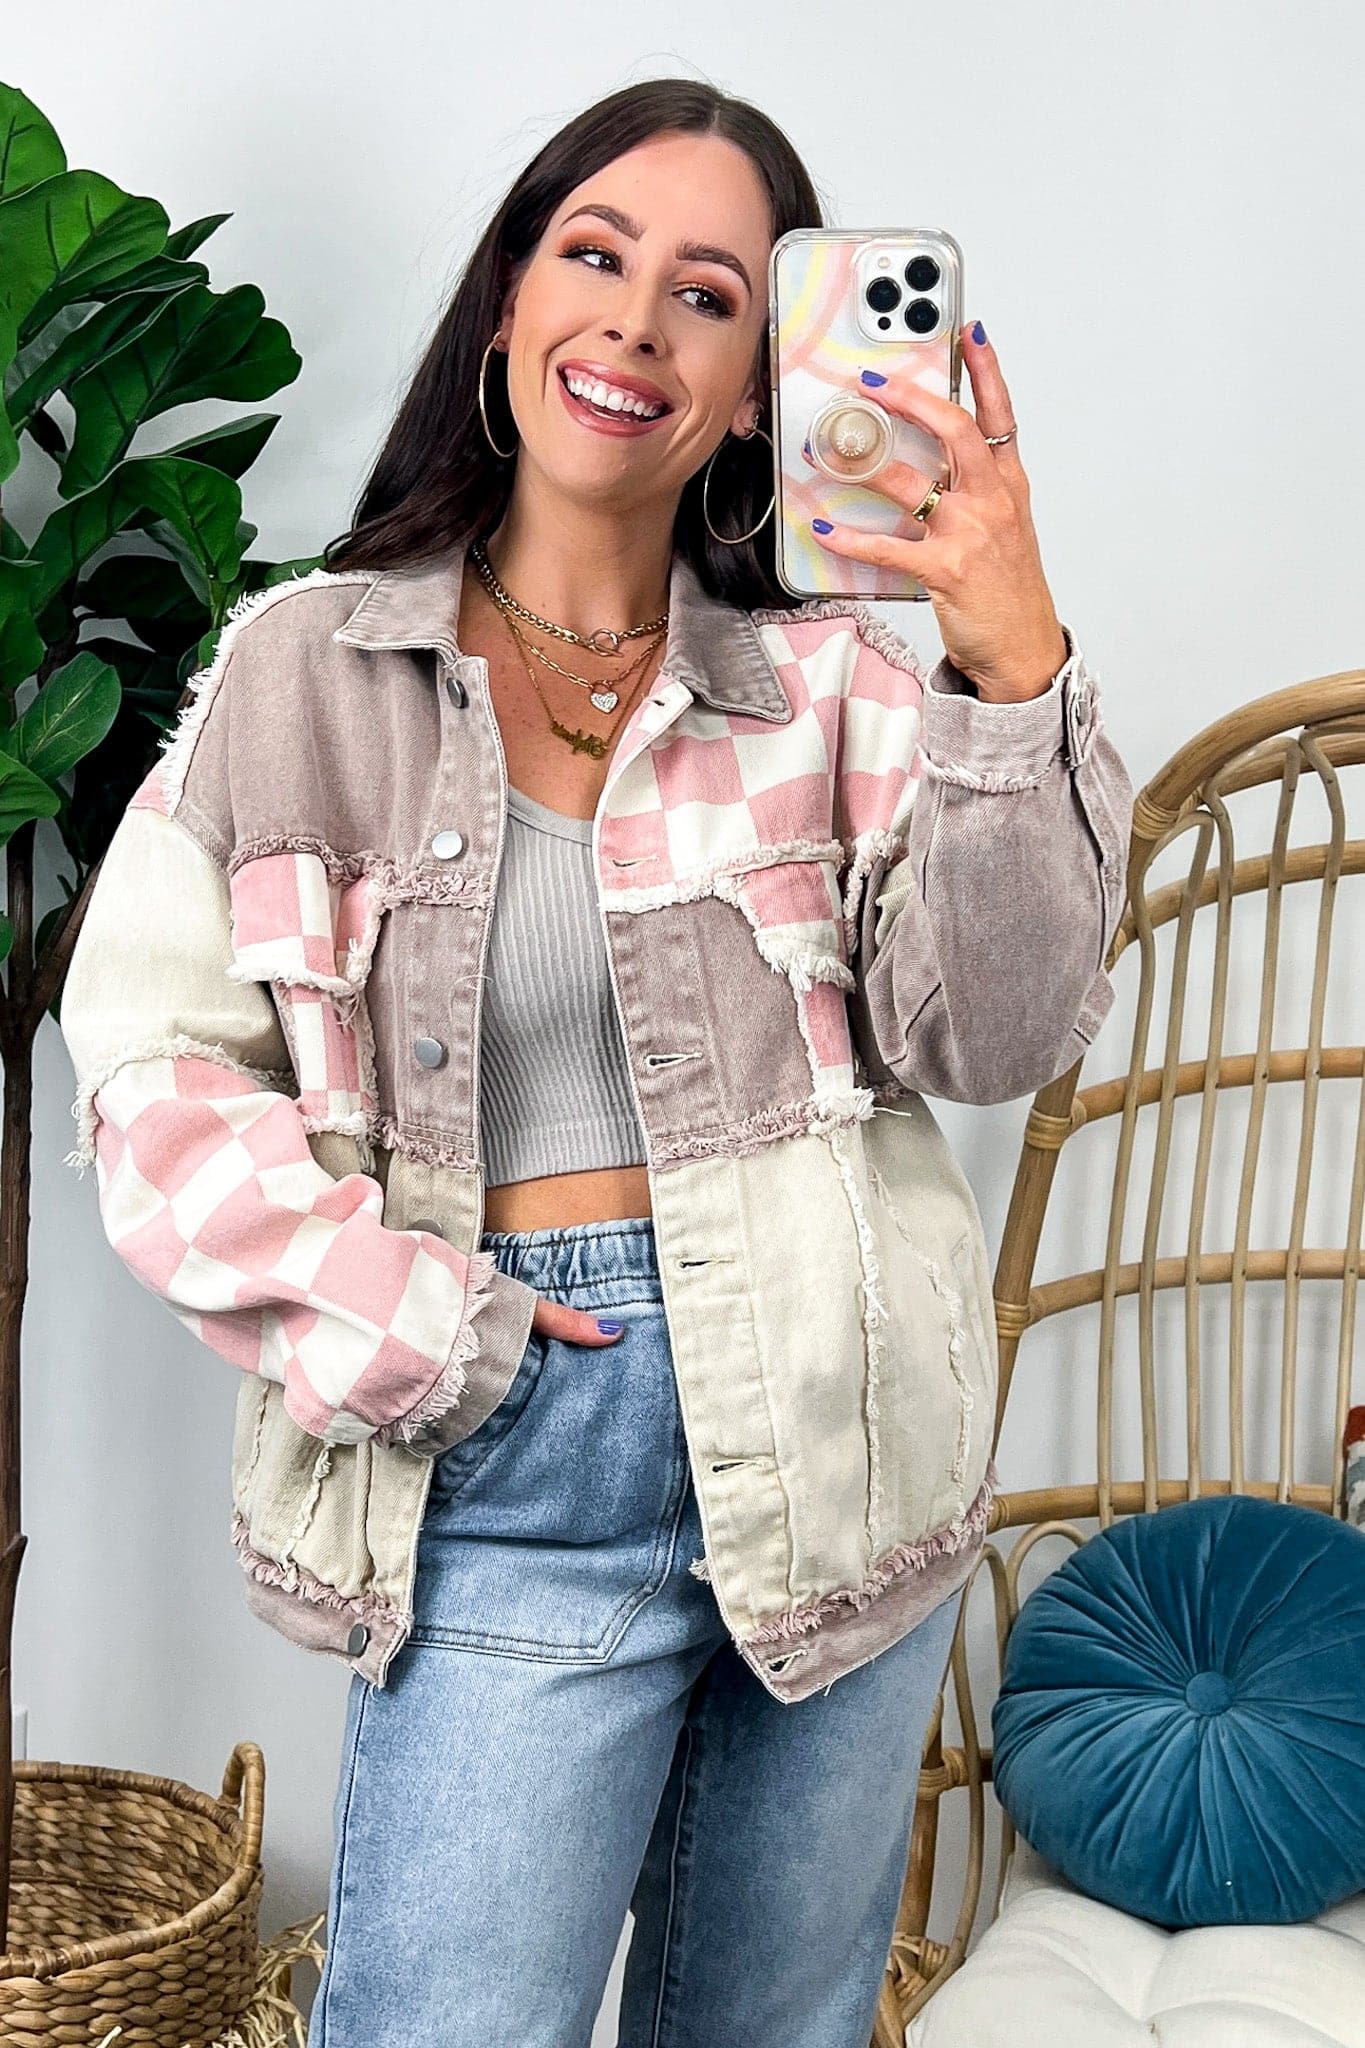  Know the Vibe Checkered Pattern Denim Jacket - BACK IN STOCK - Madison and Mallory